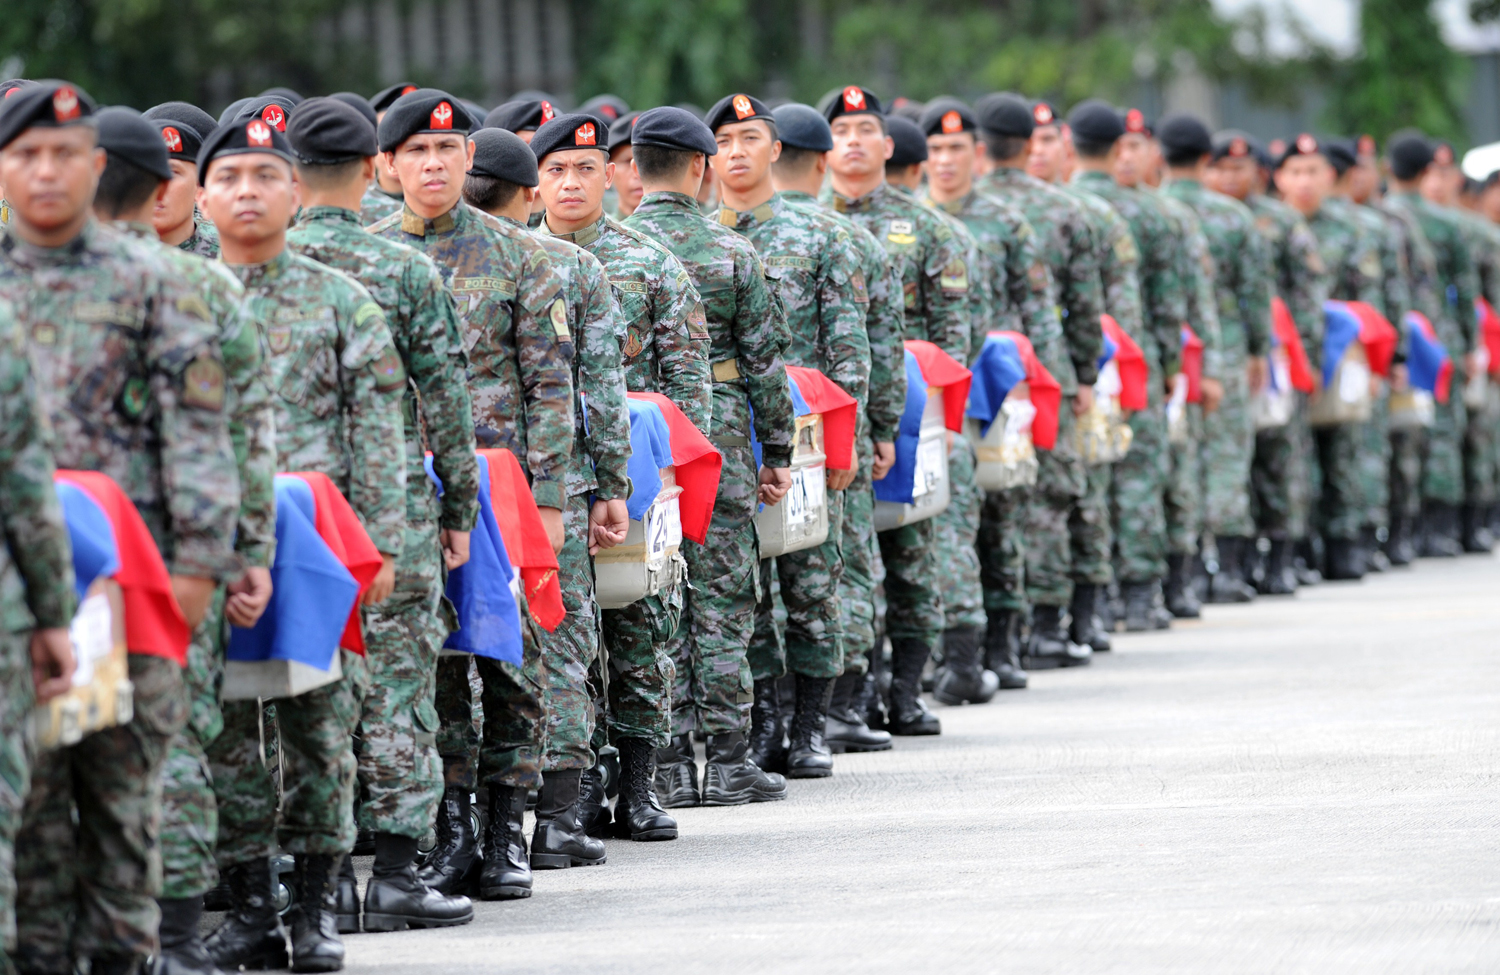 Philippine police commandos stand at attention next to the flag-draped coffins of their slain comrades shortly after arriving at a military base in Manila on Jan. 29, 2015 (Ted Aljibe — AFP/Getty Images)